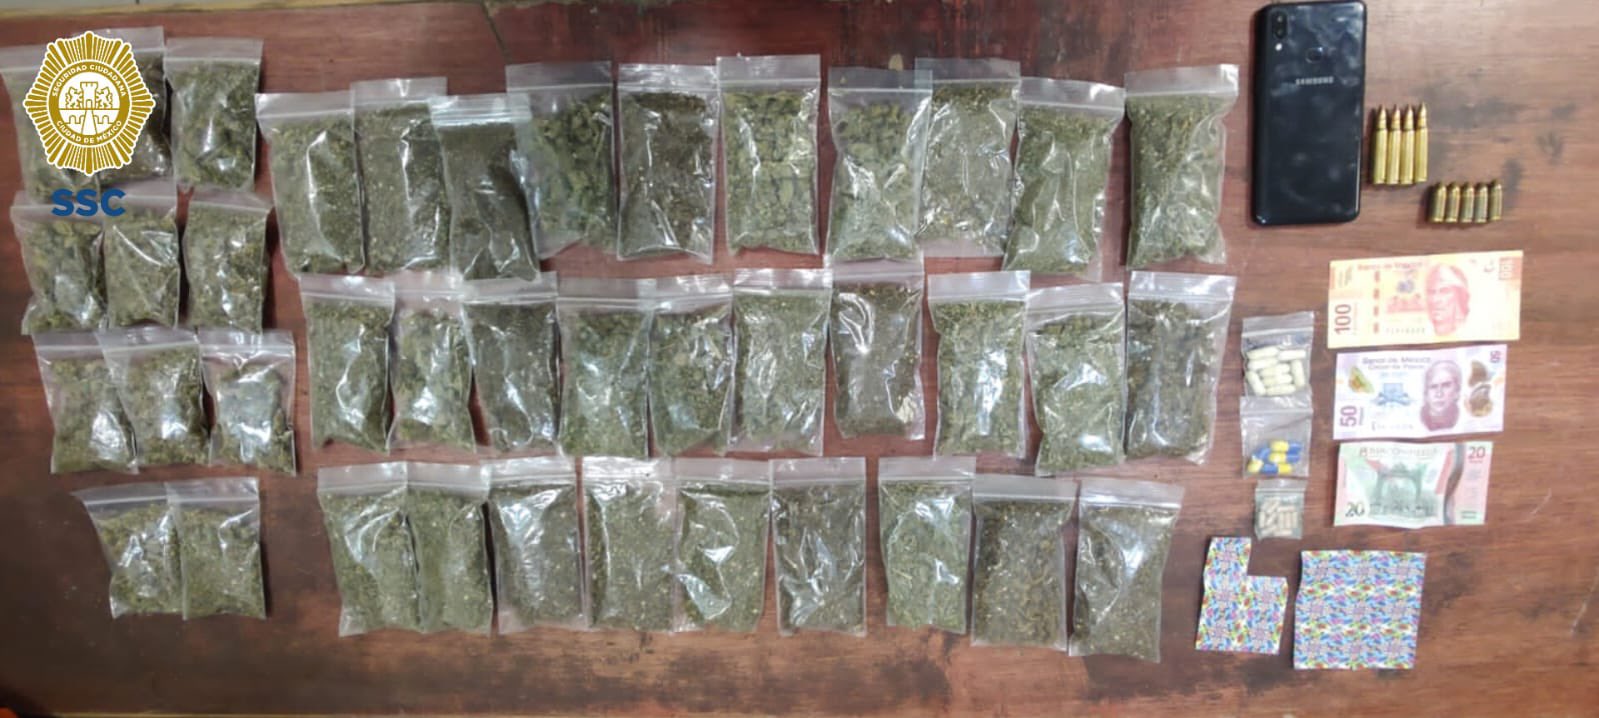 The insured men carried doses of possible marijuana and cocaine (Photo: SSC)